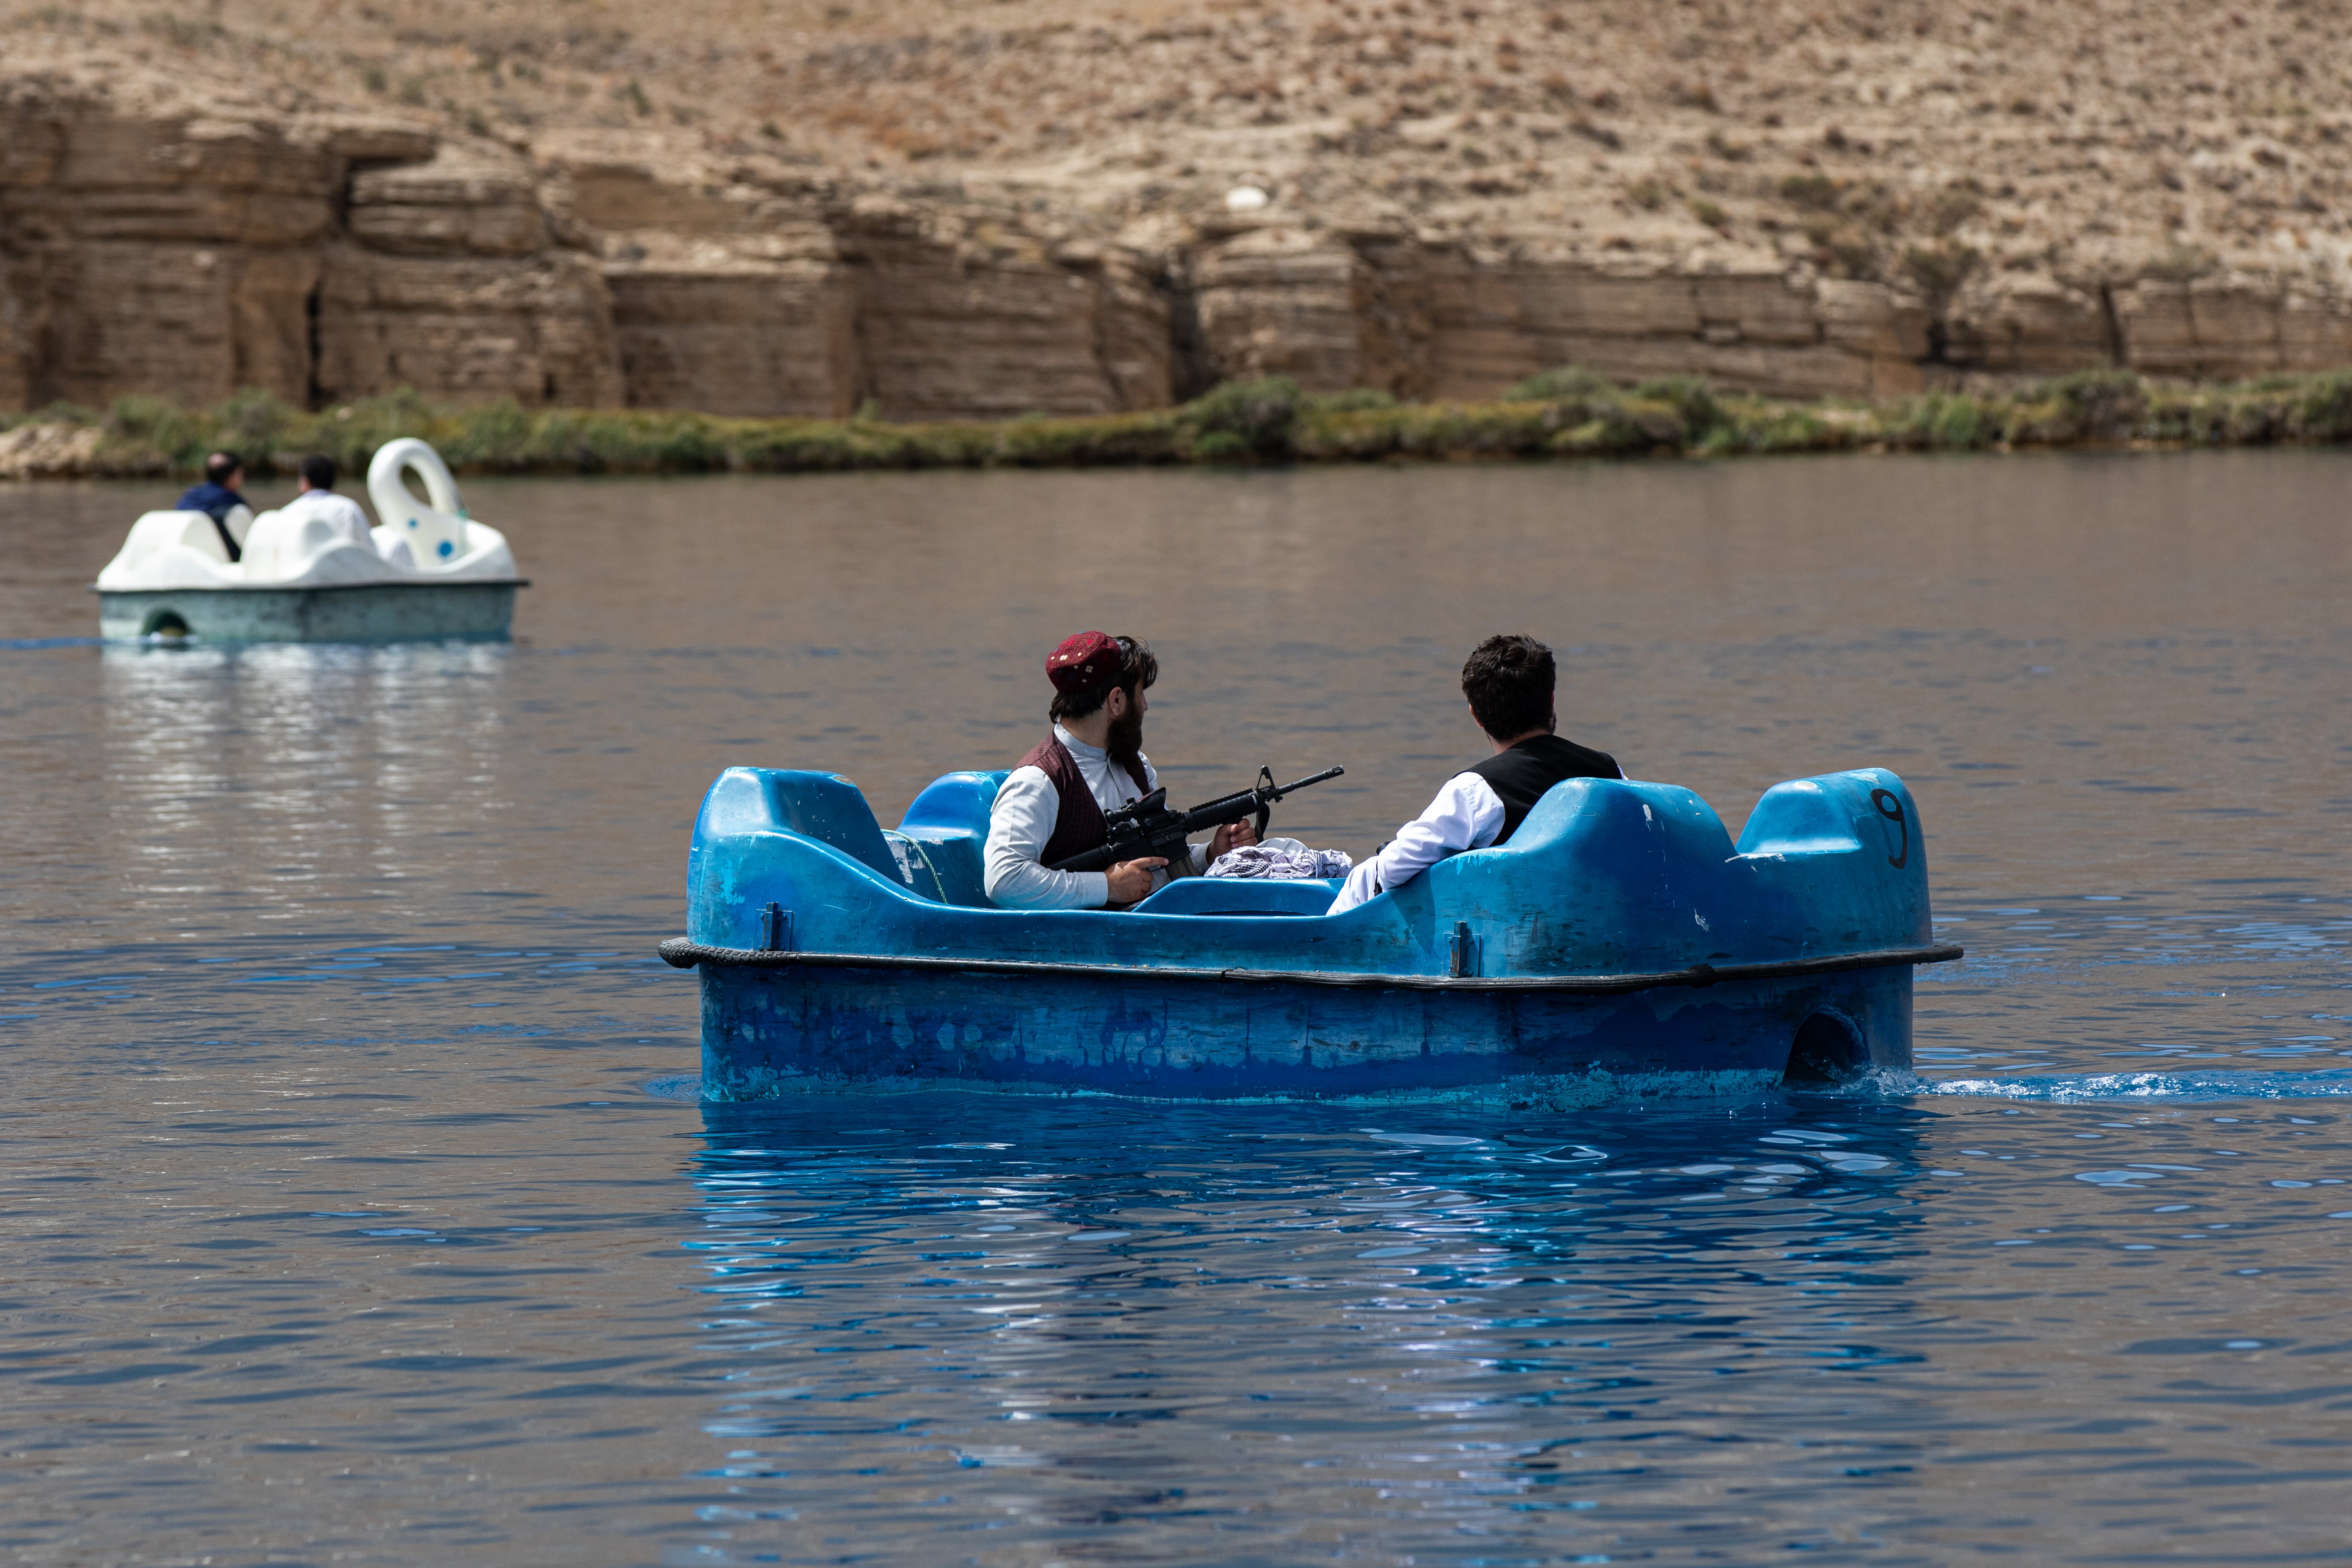 Taliban members paddle in a boat in Band-e-Amir